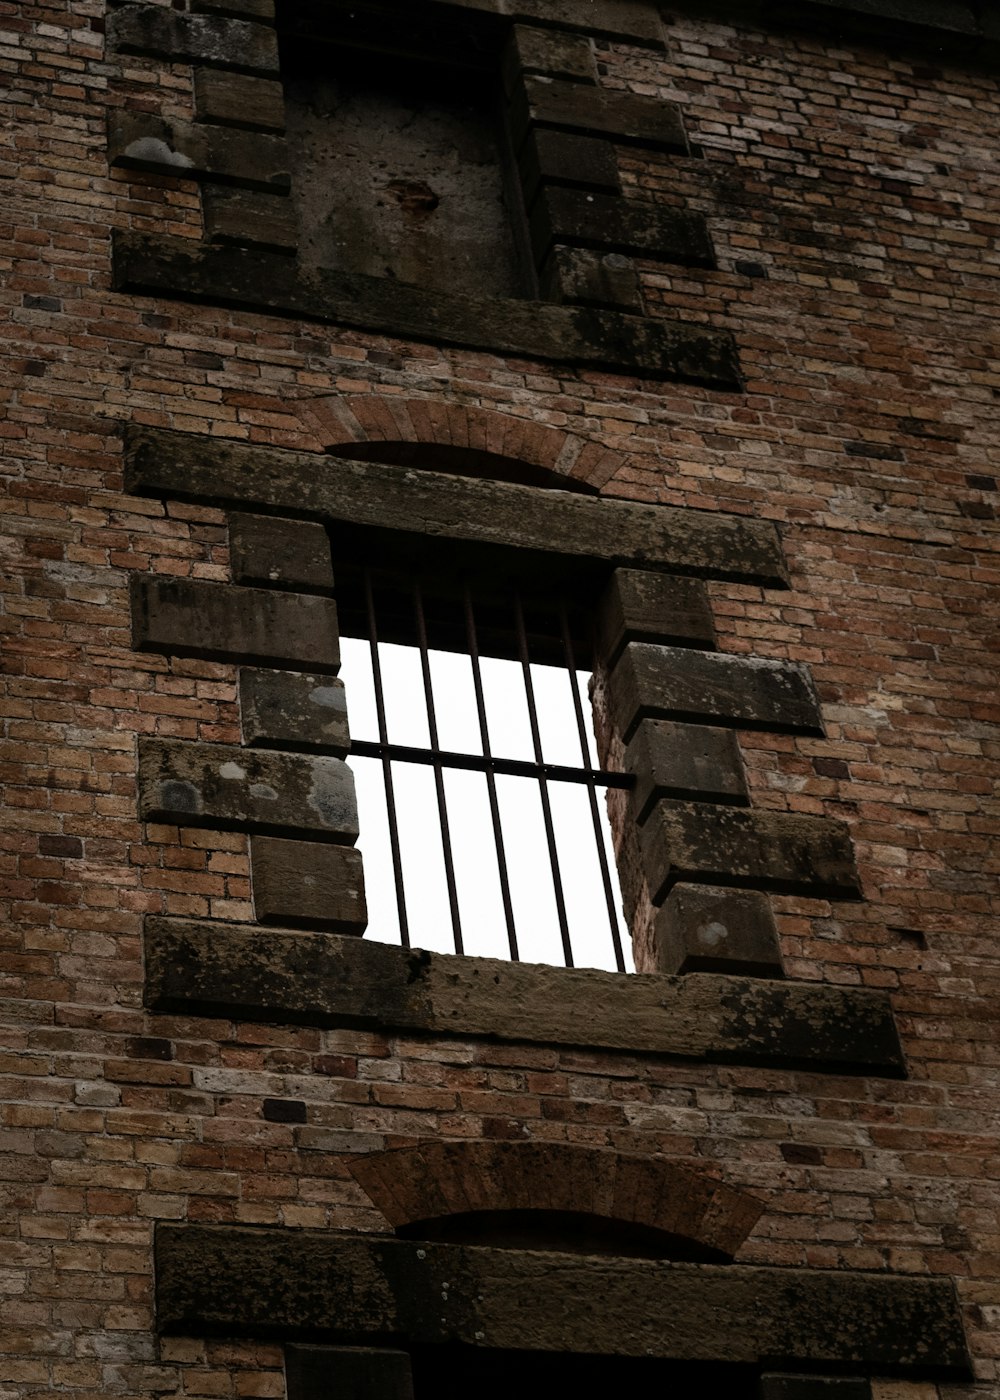 a tall brick building with a barred window